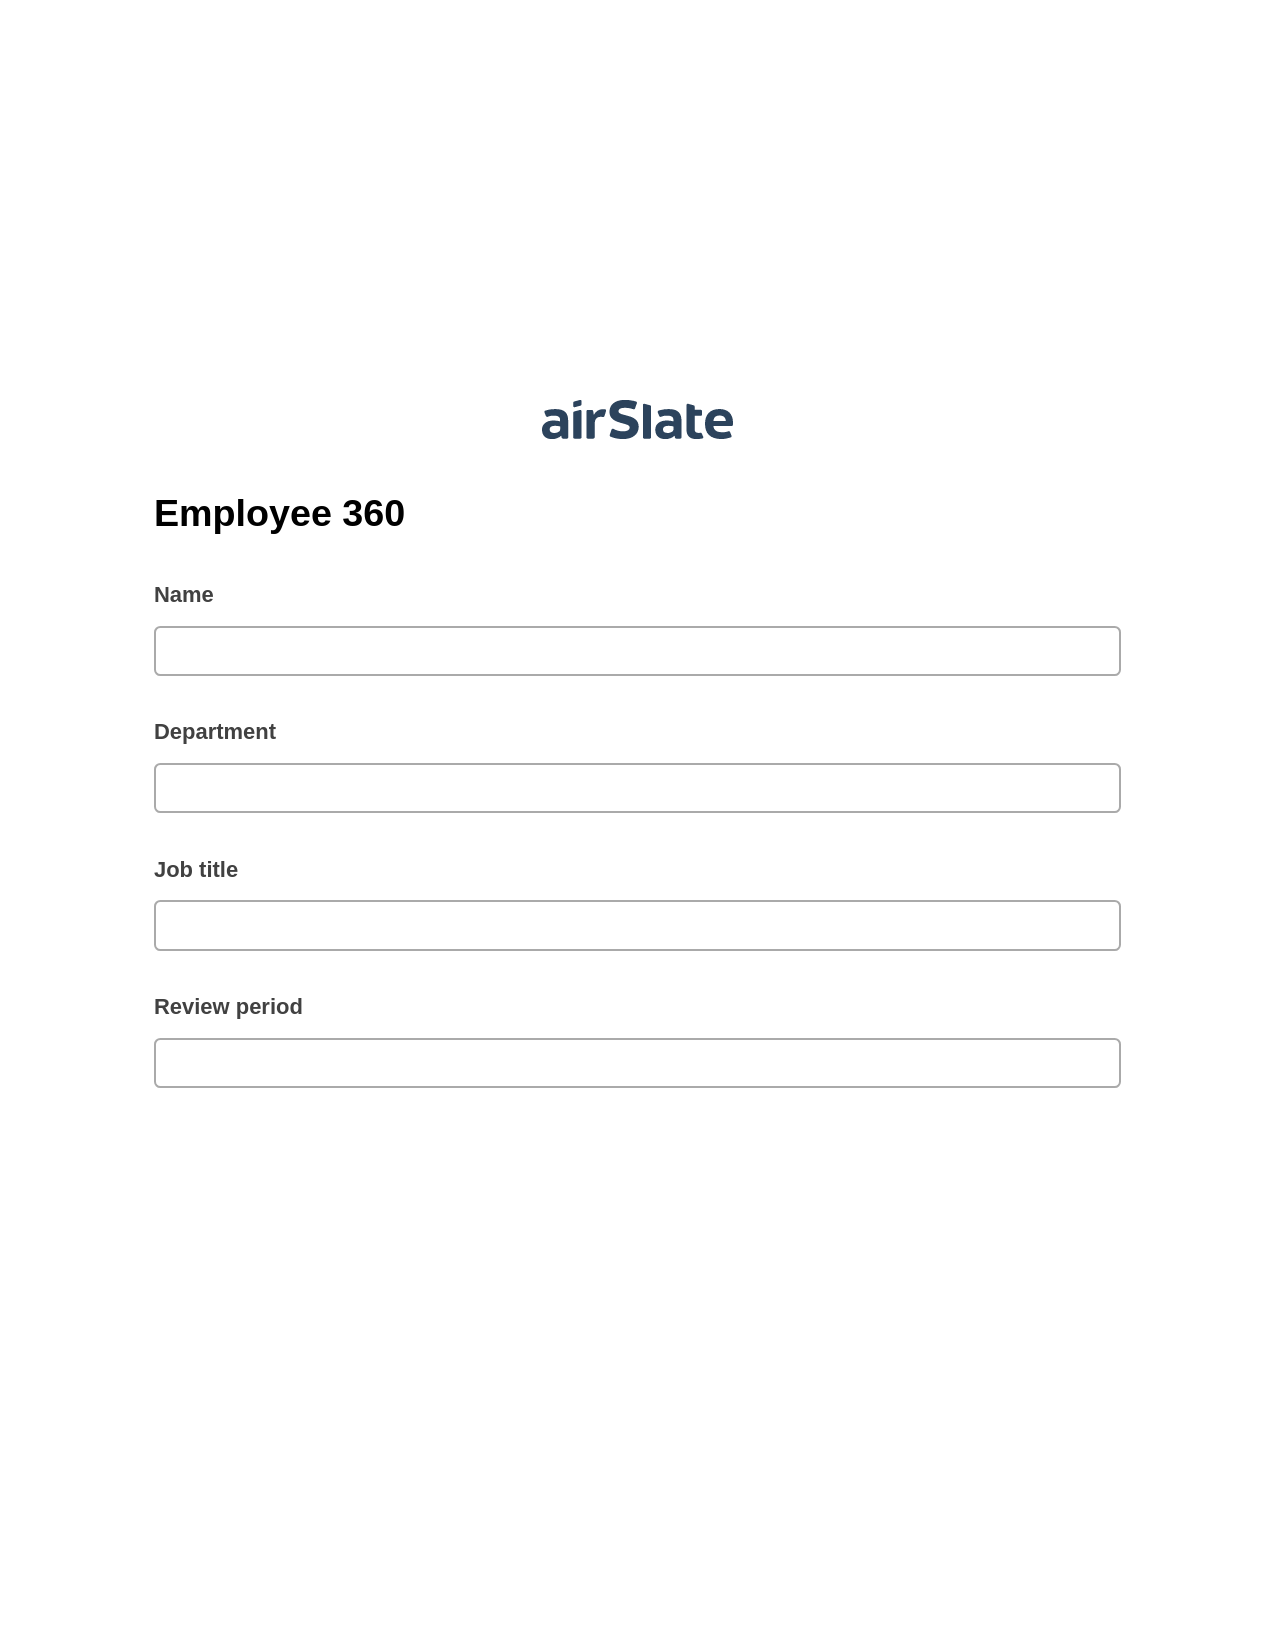 Multirole Employee 360 Pre-fill from another Slate Bot, Create Slate every Google Sheet Update Bot, Export to WebMerge Bot